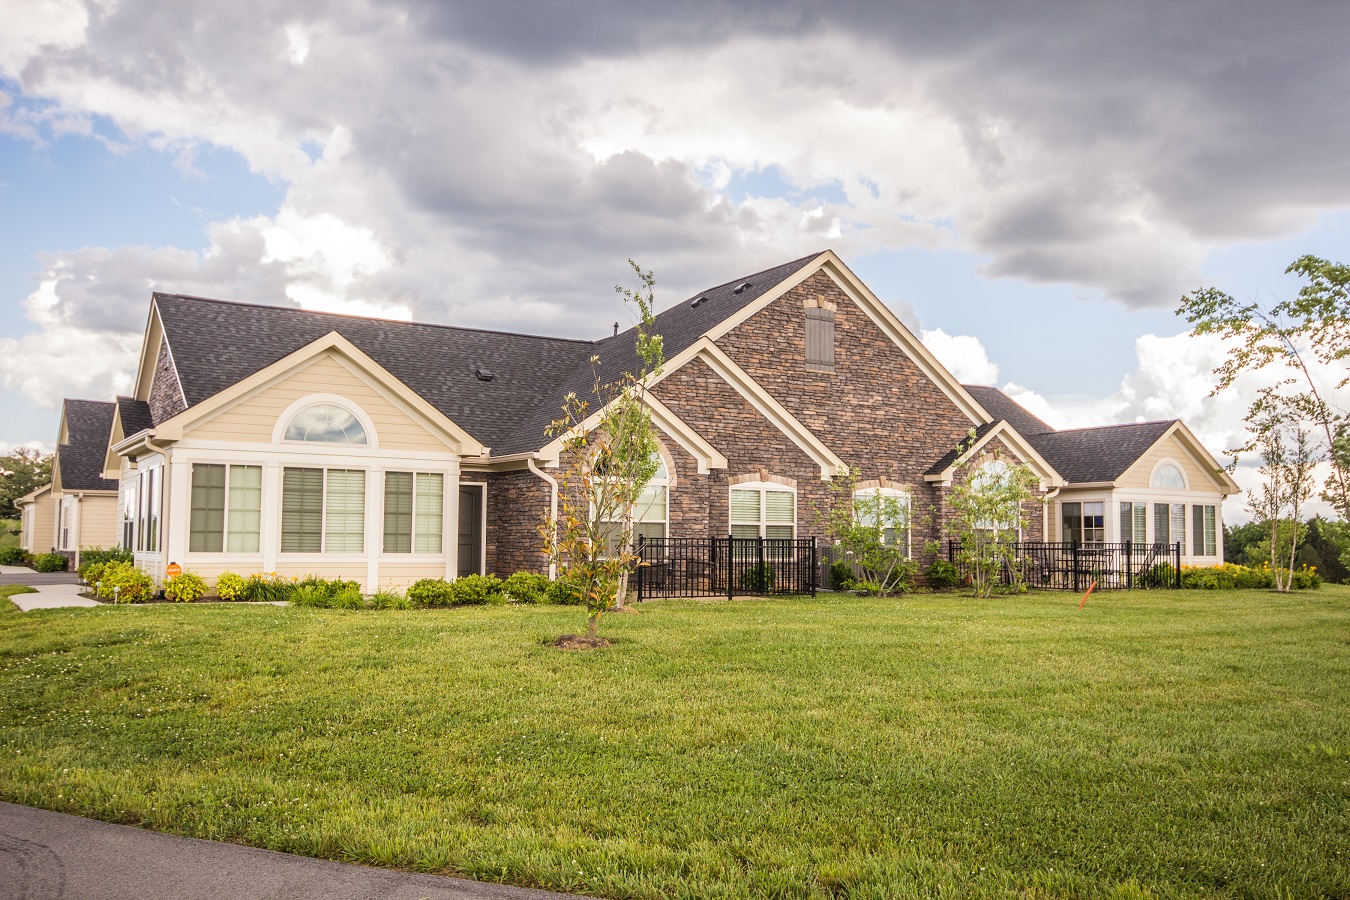 Cottages at Pryse Farm's Canterbury Model